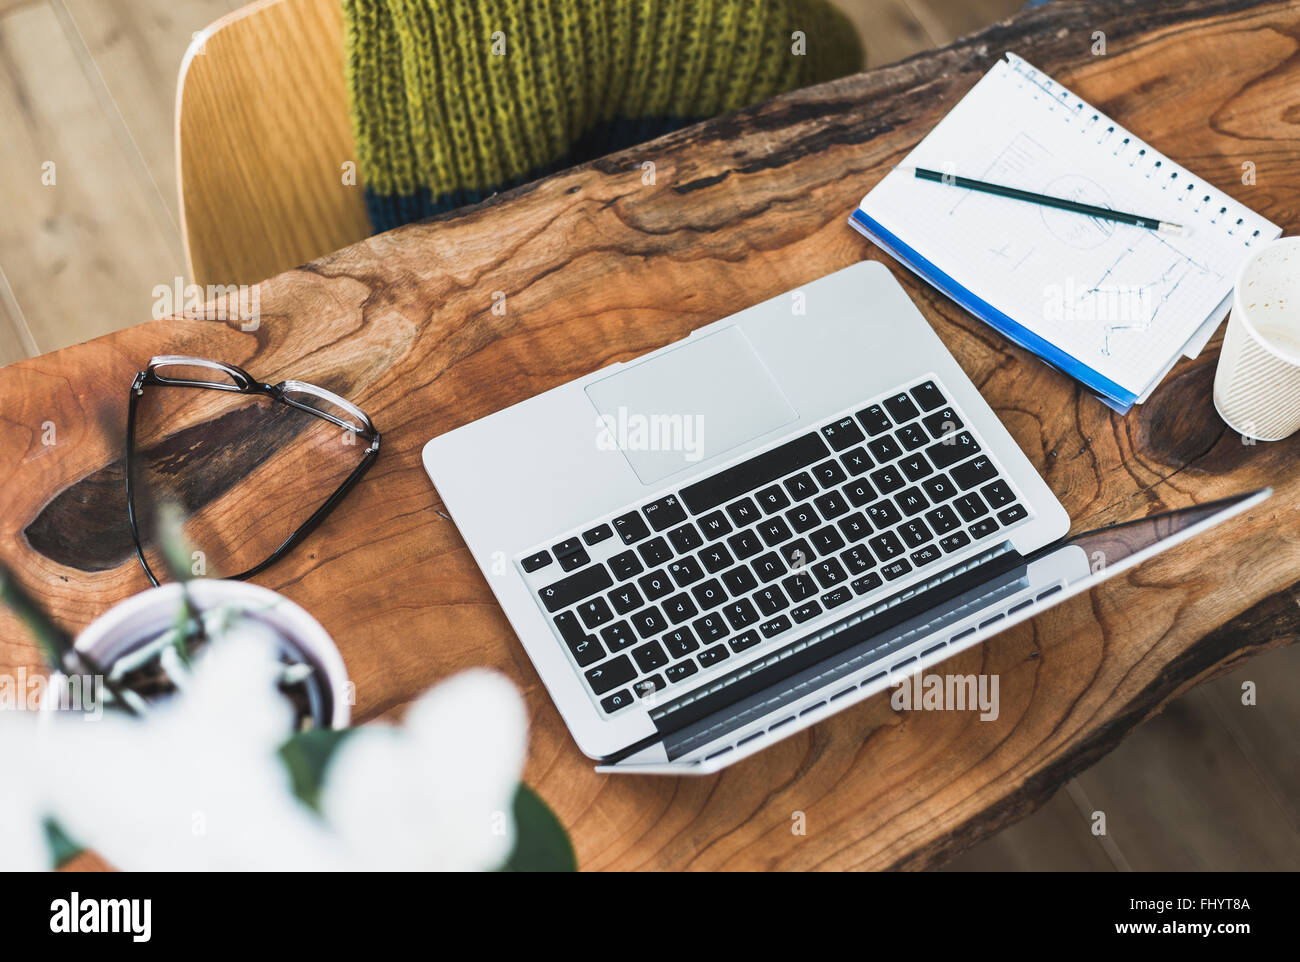 Laptop, notepad and glasses on wooden desk Stock Photo